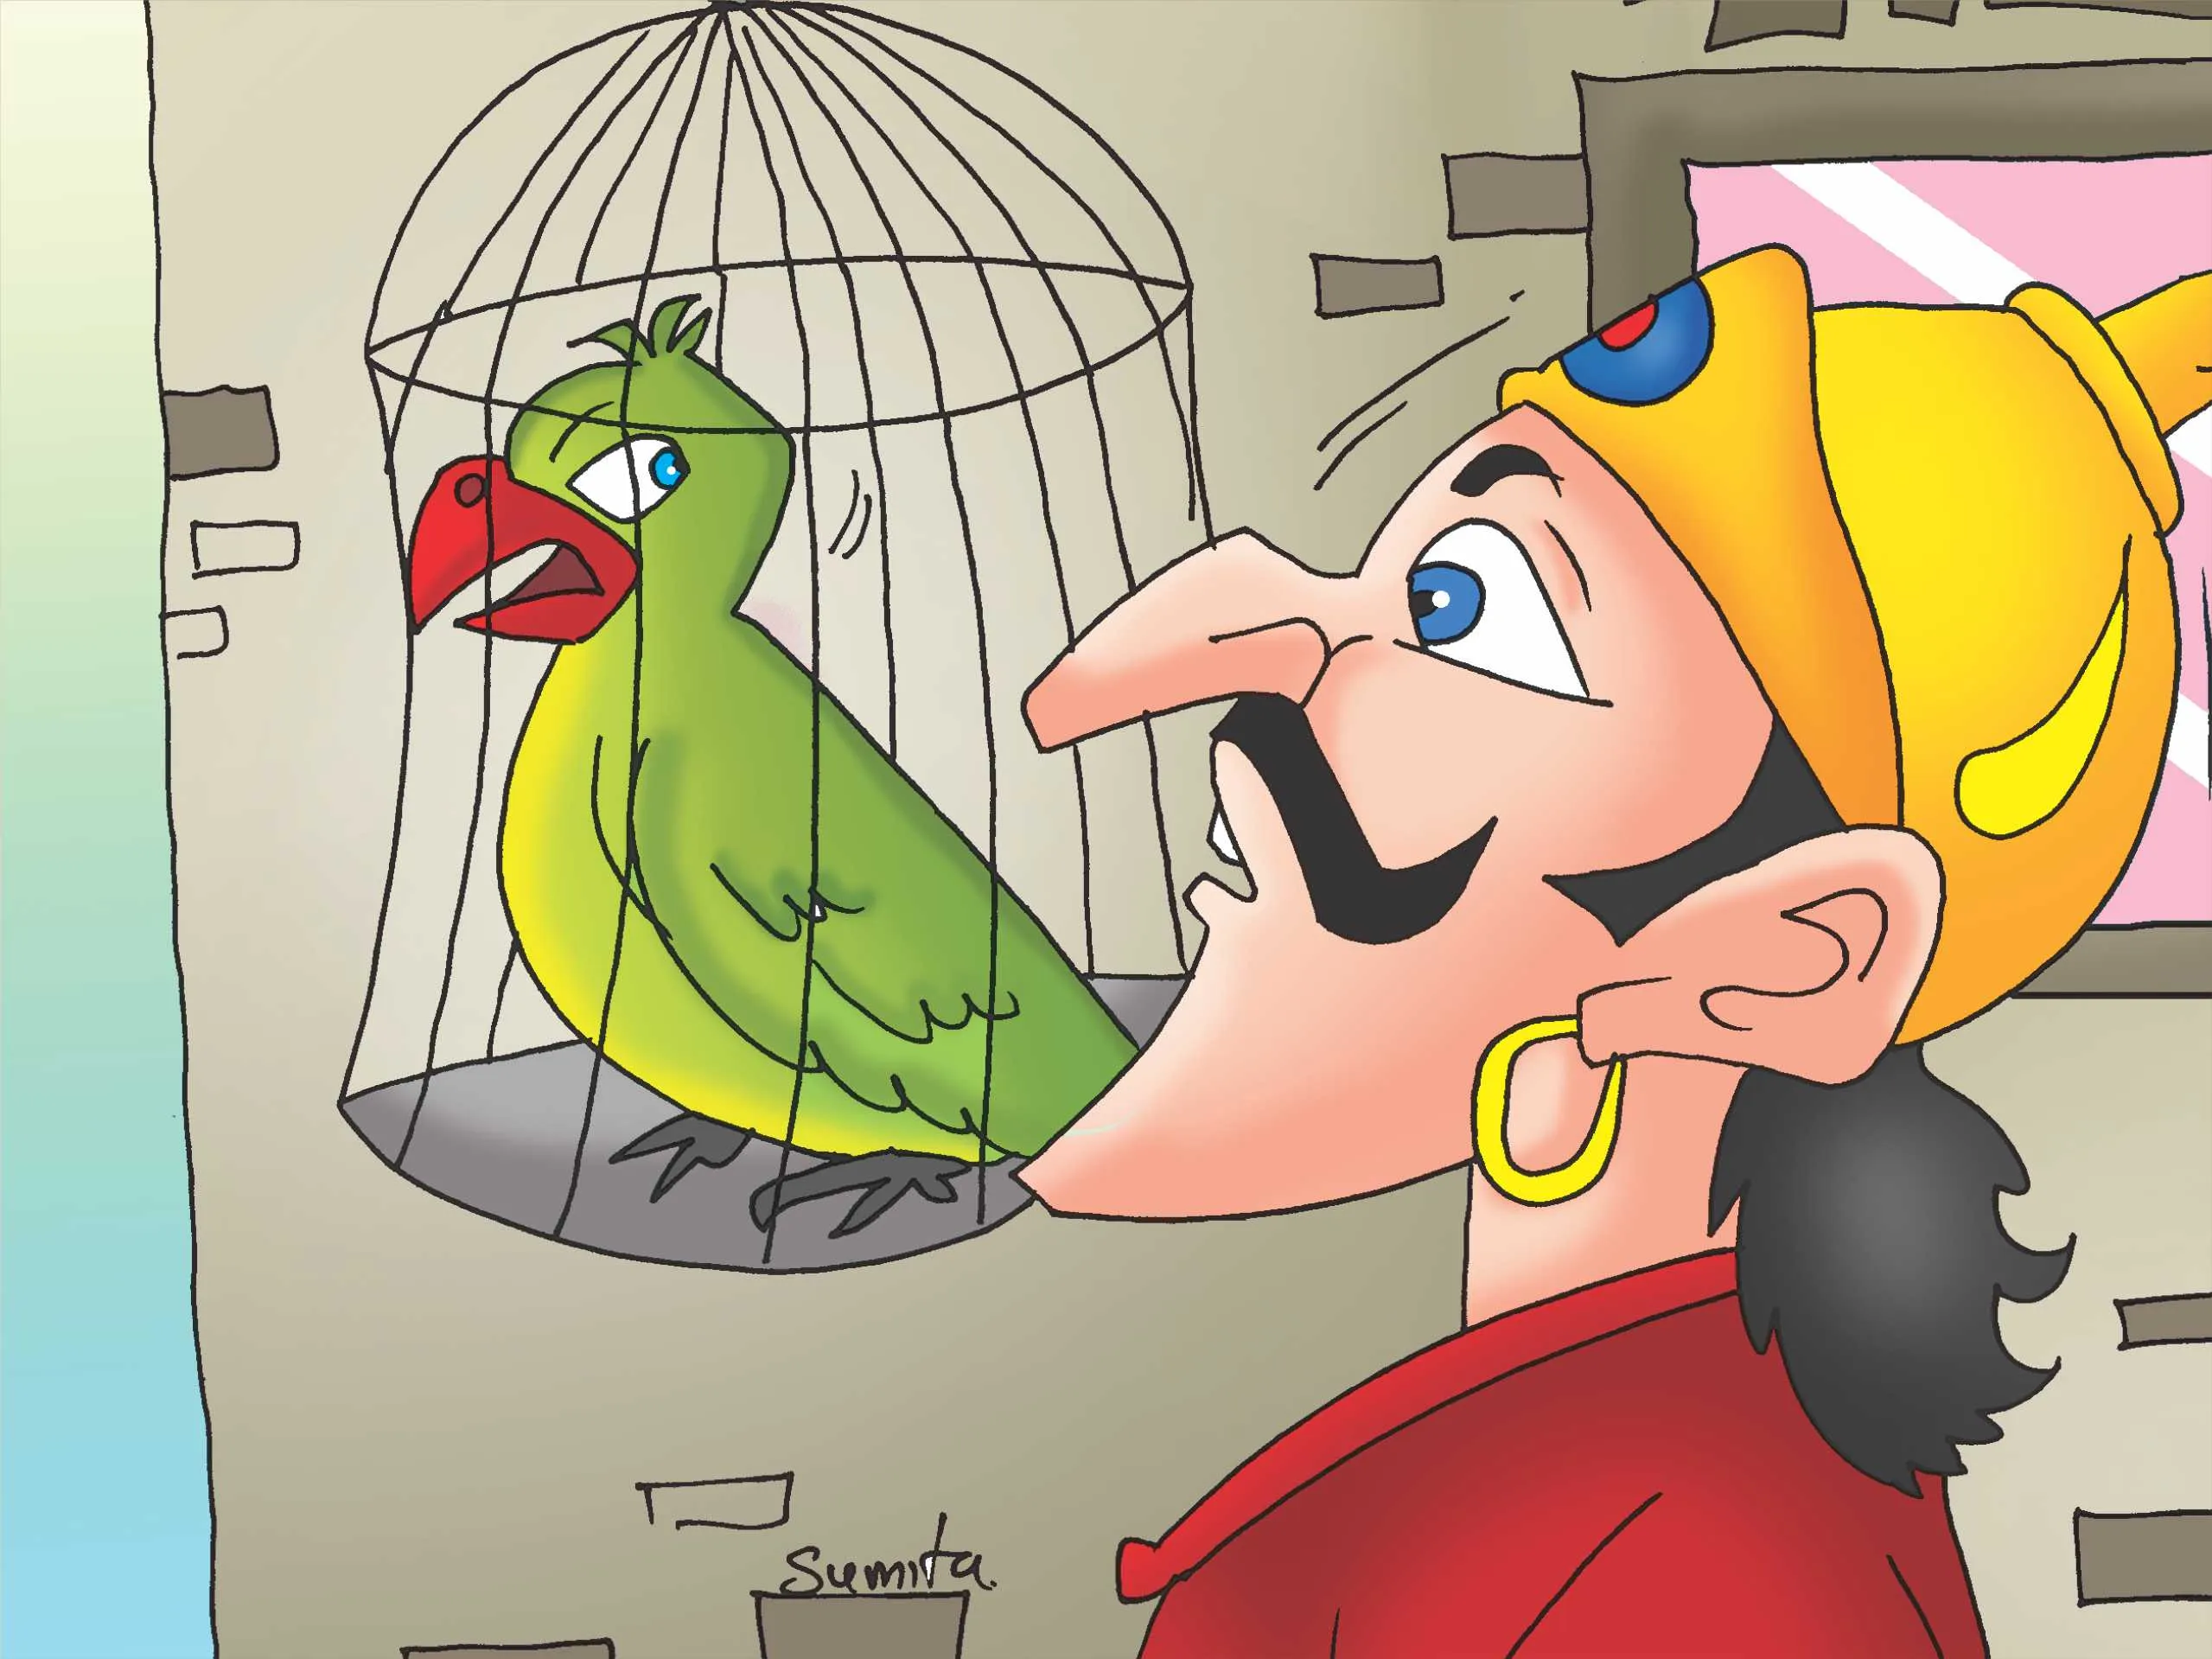 King with a parrot cartoon image